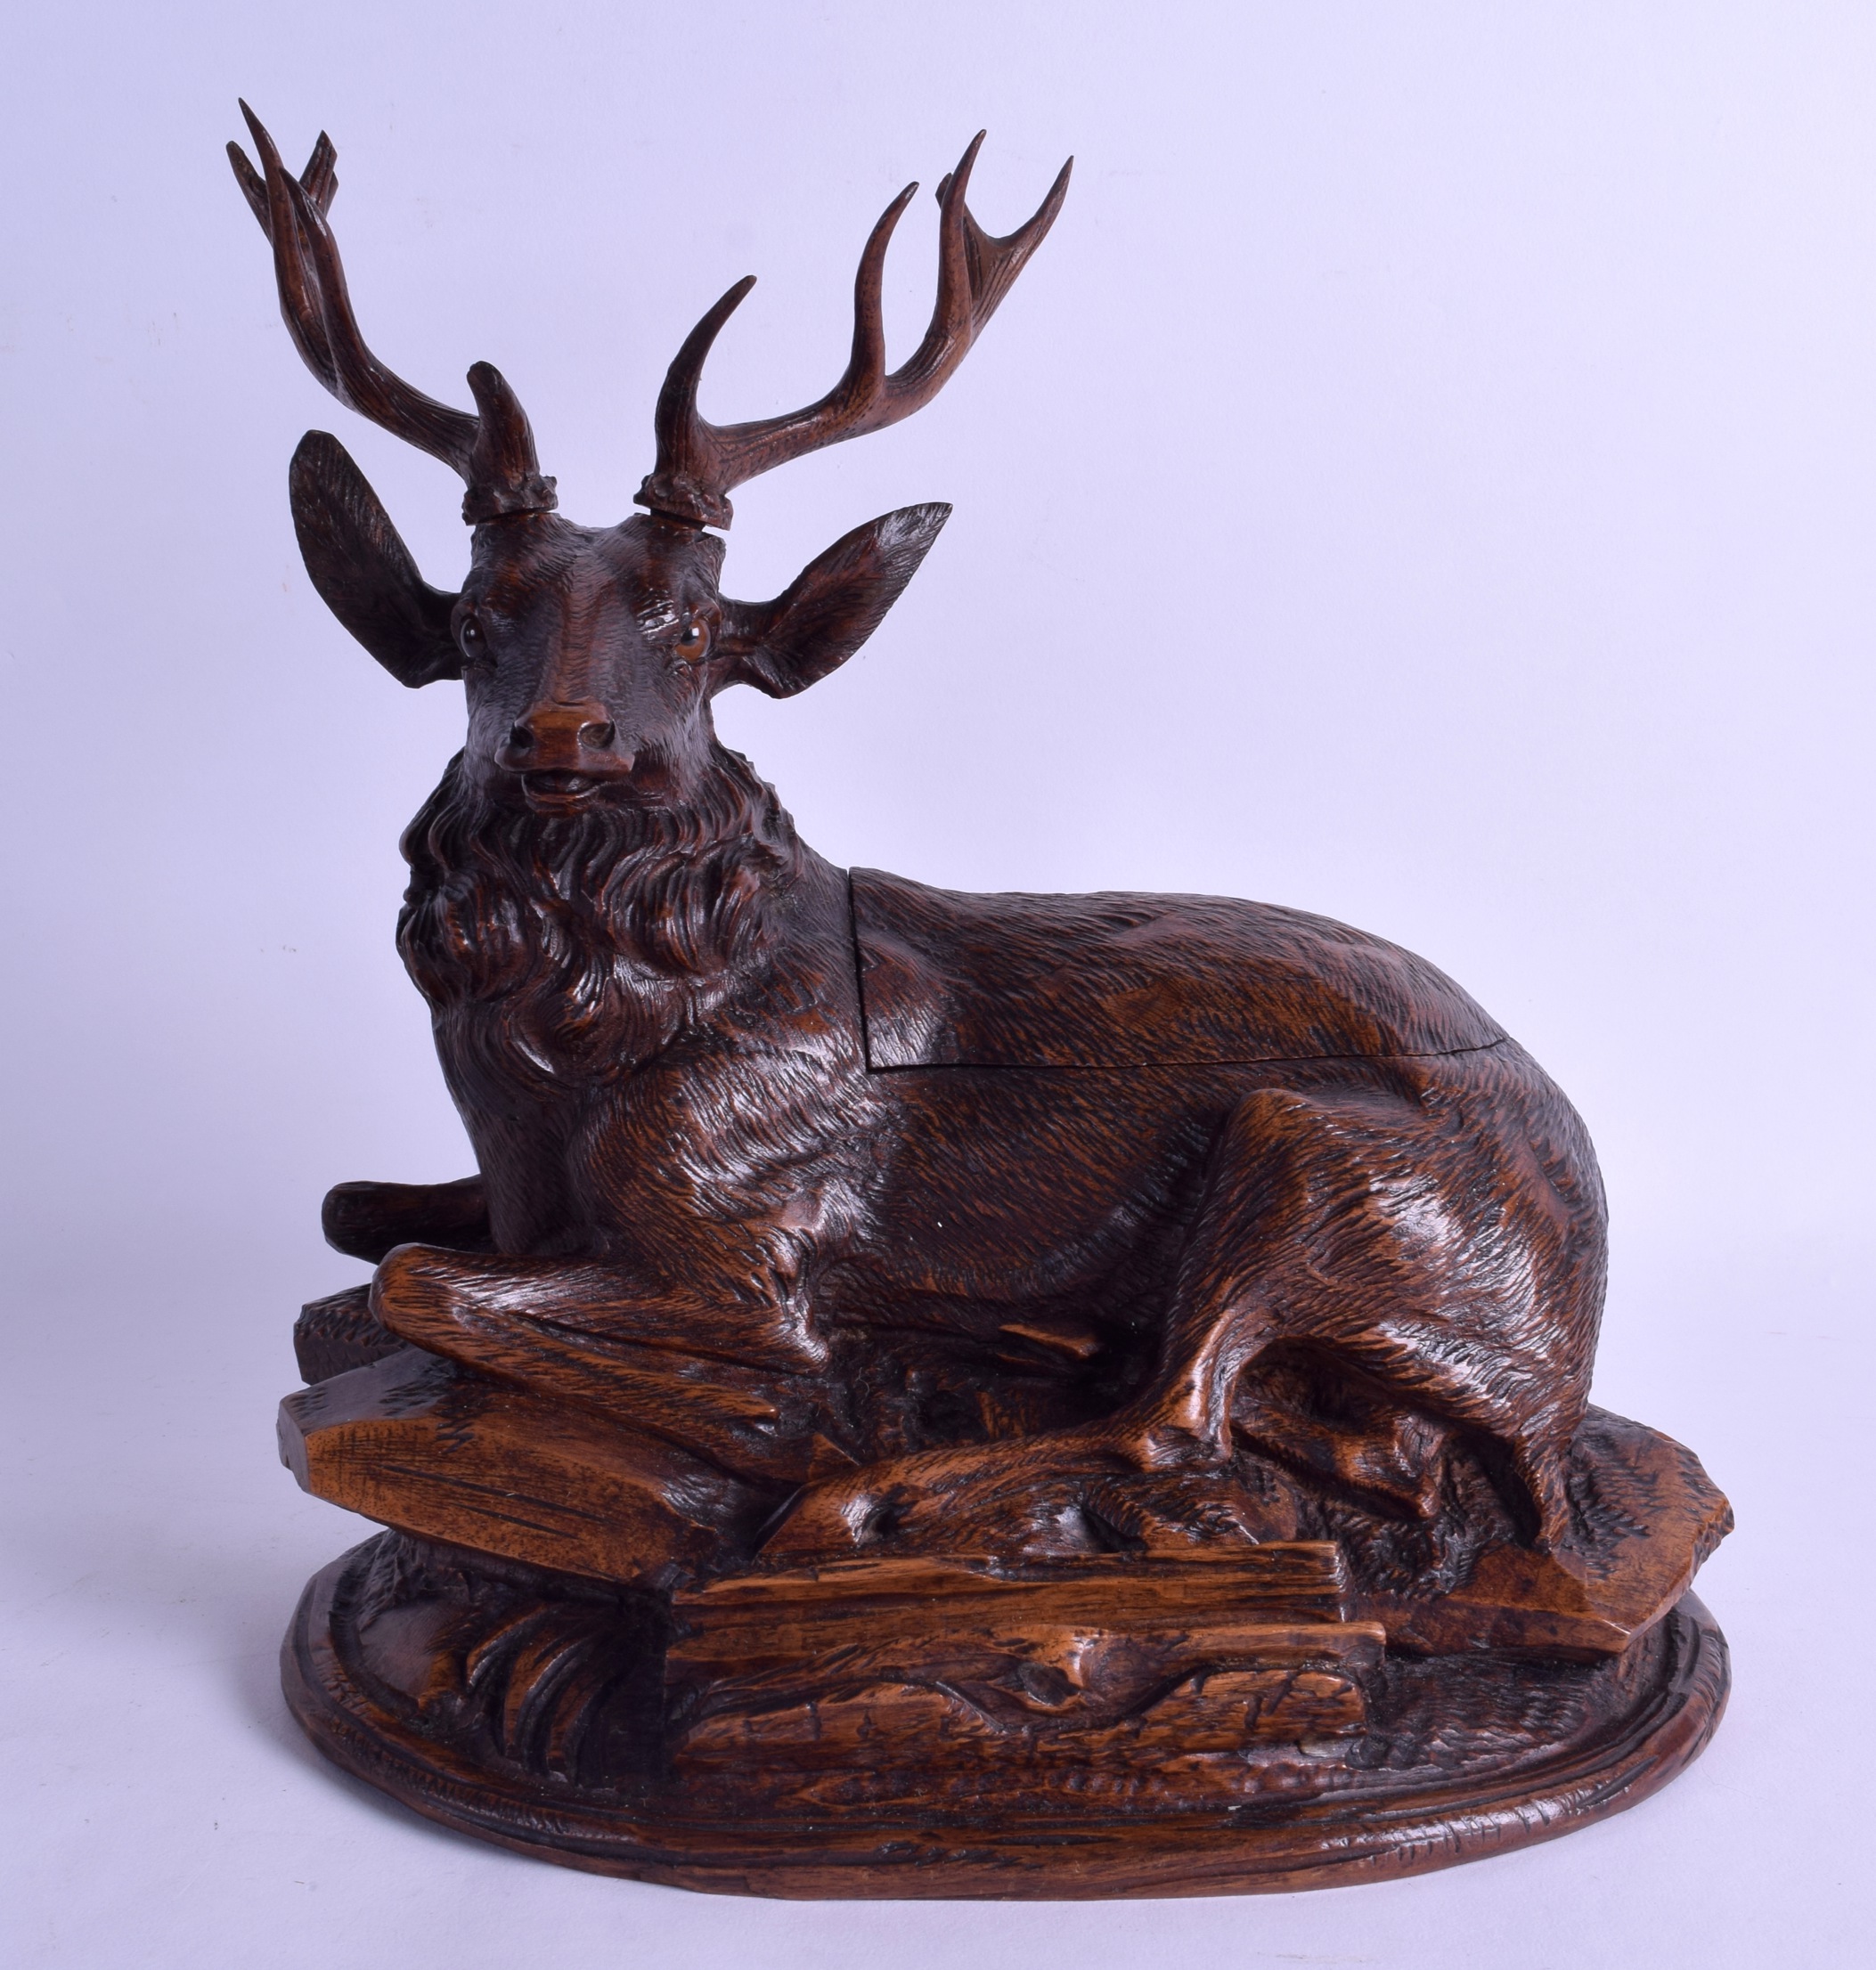 A FINE 19TH CENTURY BAVARIAN BLACK FOREST CARVED WOOD INKWELL in the form of a seated stag upon a